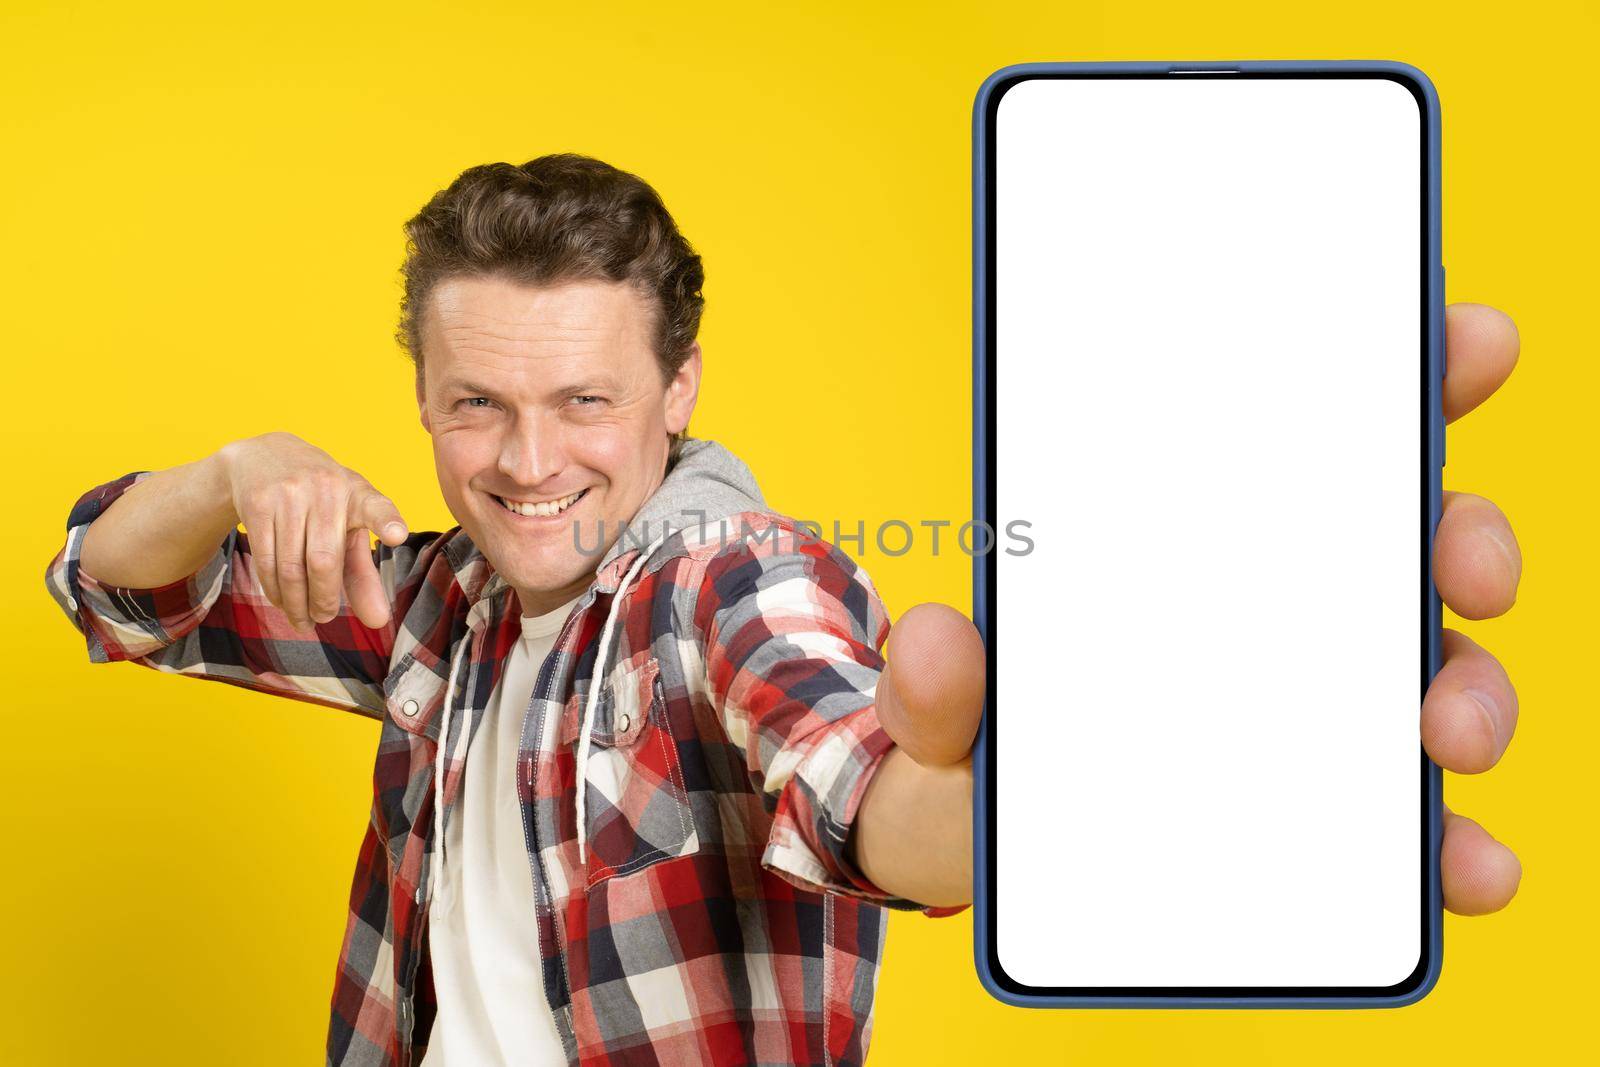 Pointing at big smartphone in hand with white screen blond caucasian man, wearing red plaid shirt. Man with phone display mock up isolated on yellow background. Mobile app advertisement by LipikStockMedia